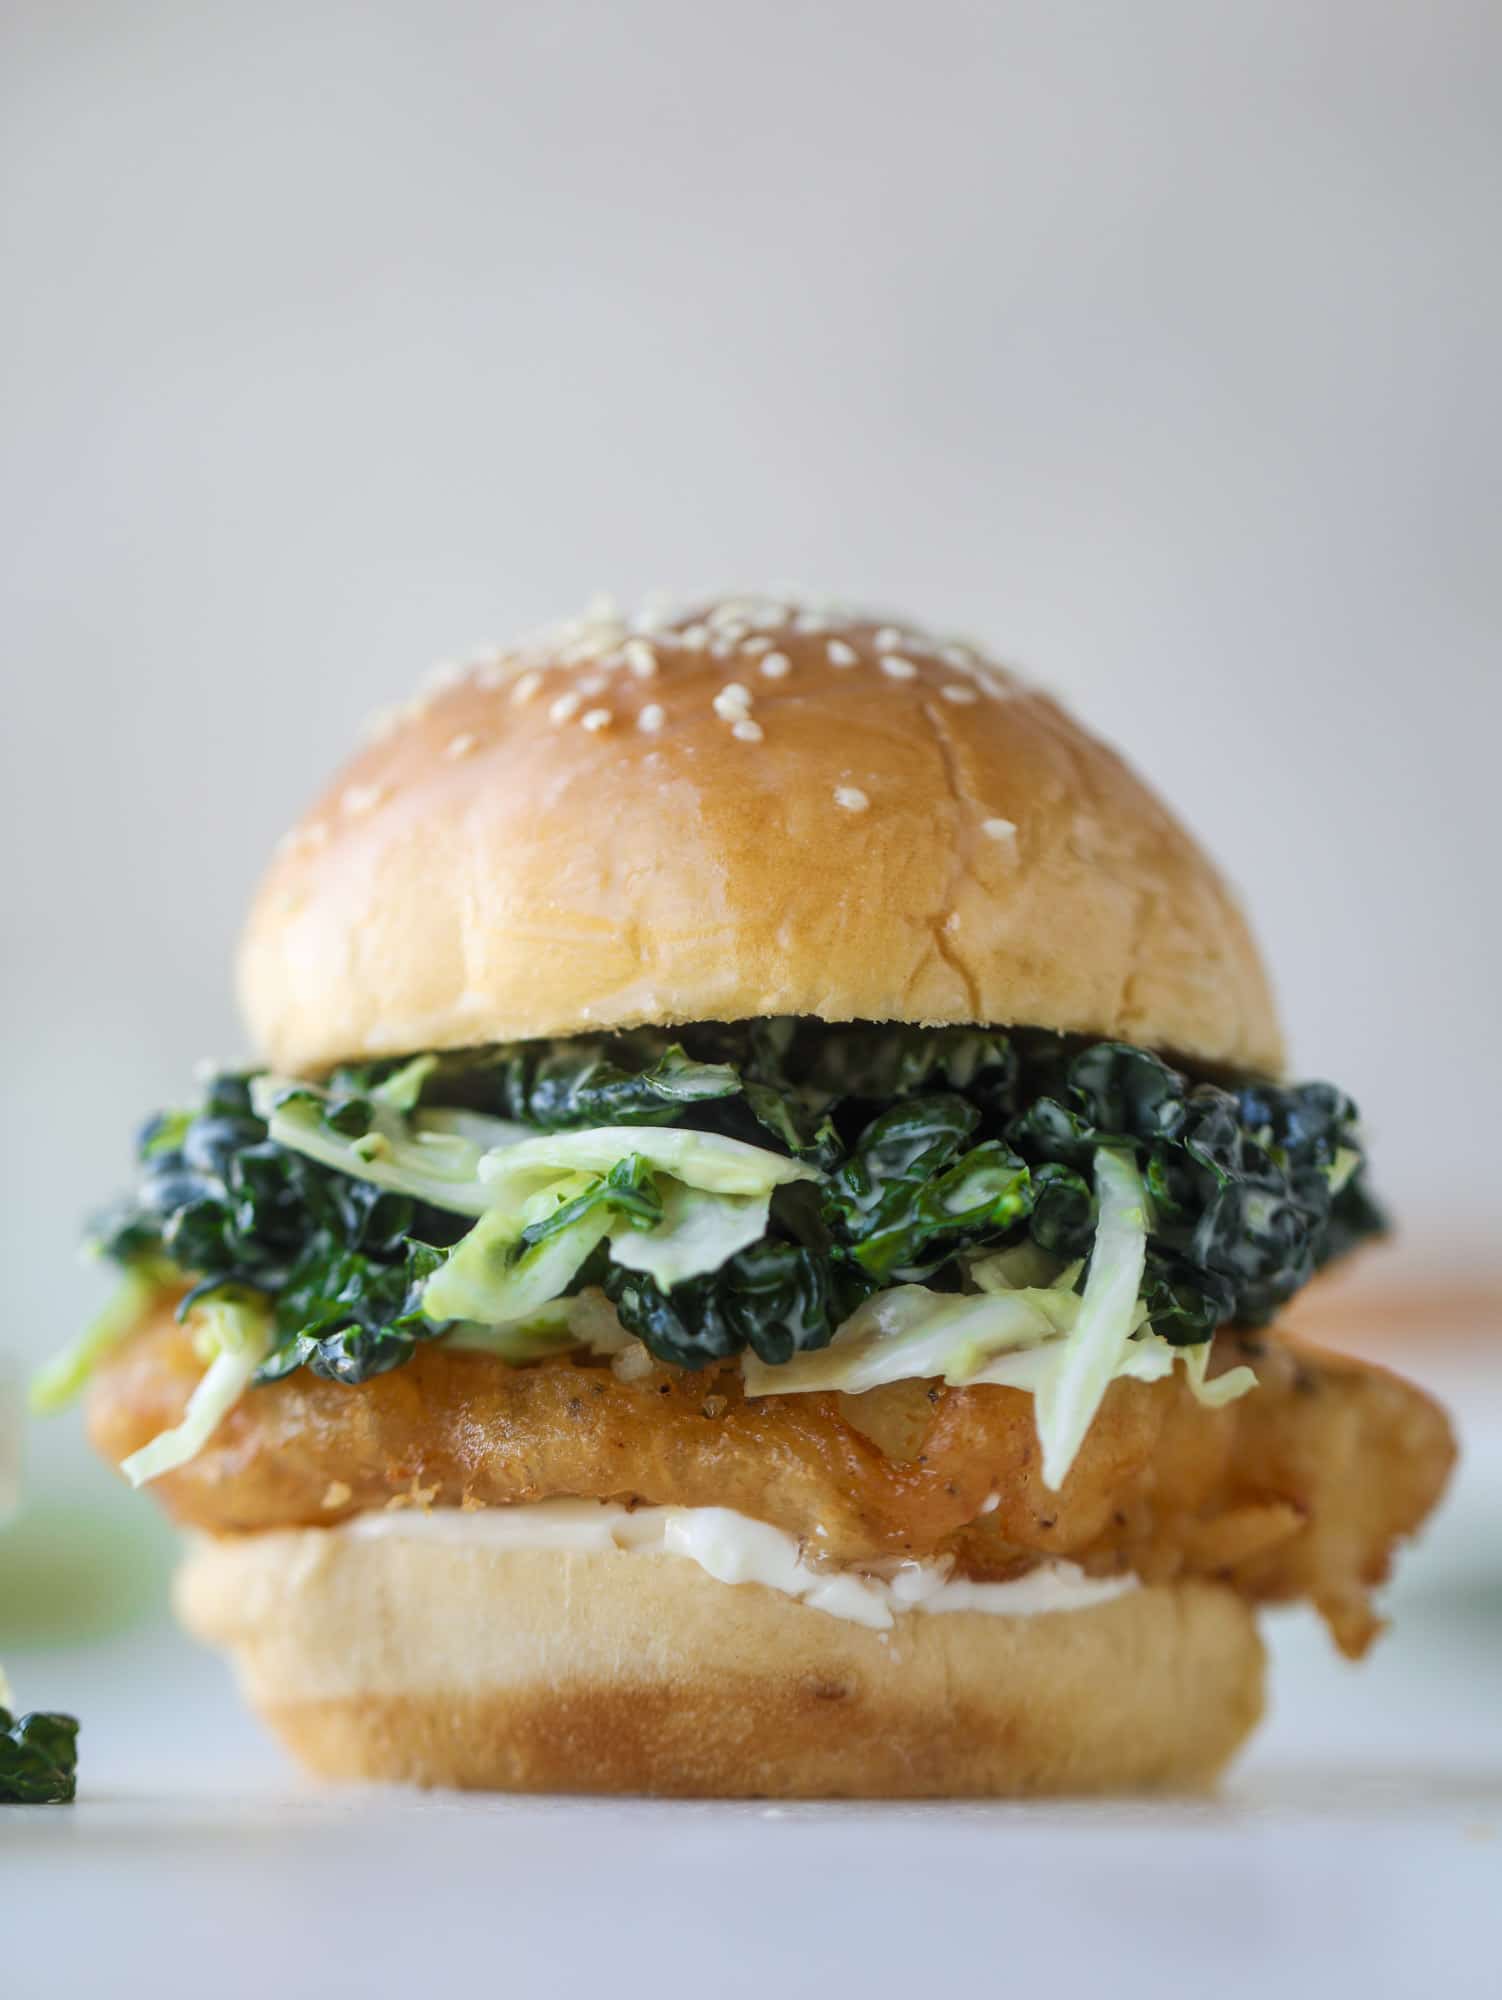 A light and crispy fish sandwich made with a simple beer batter and topped with a hearty, creamy kale cole slaw. Loaded with flavor! I howsweeteats.com #crispyfish #sandwich